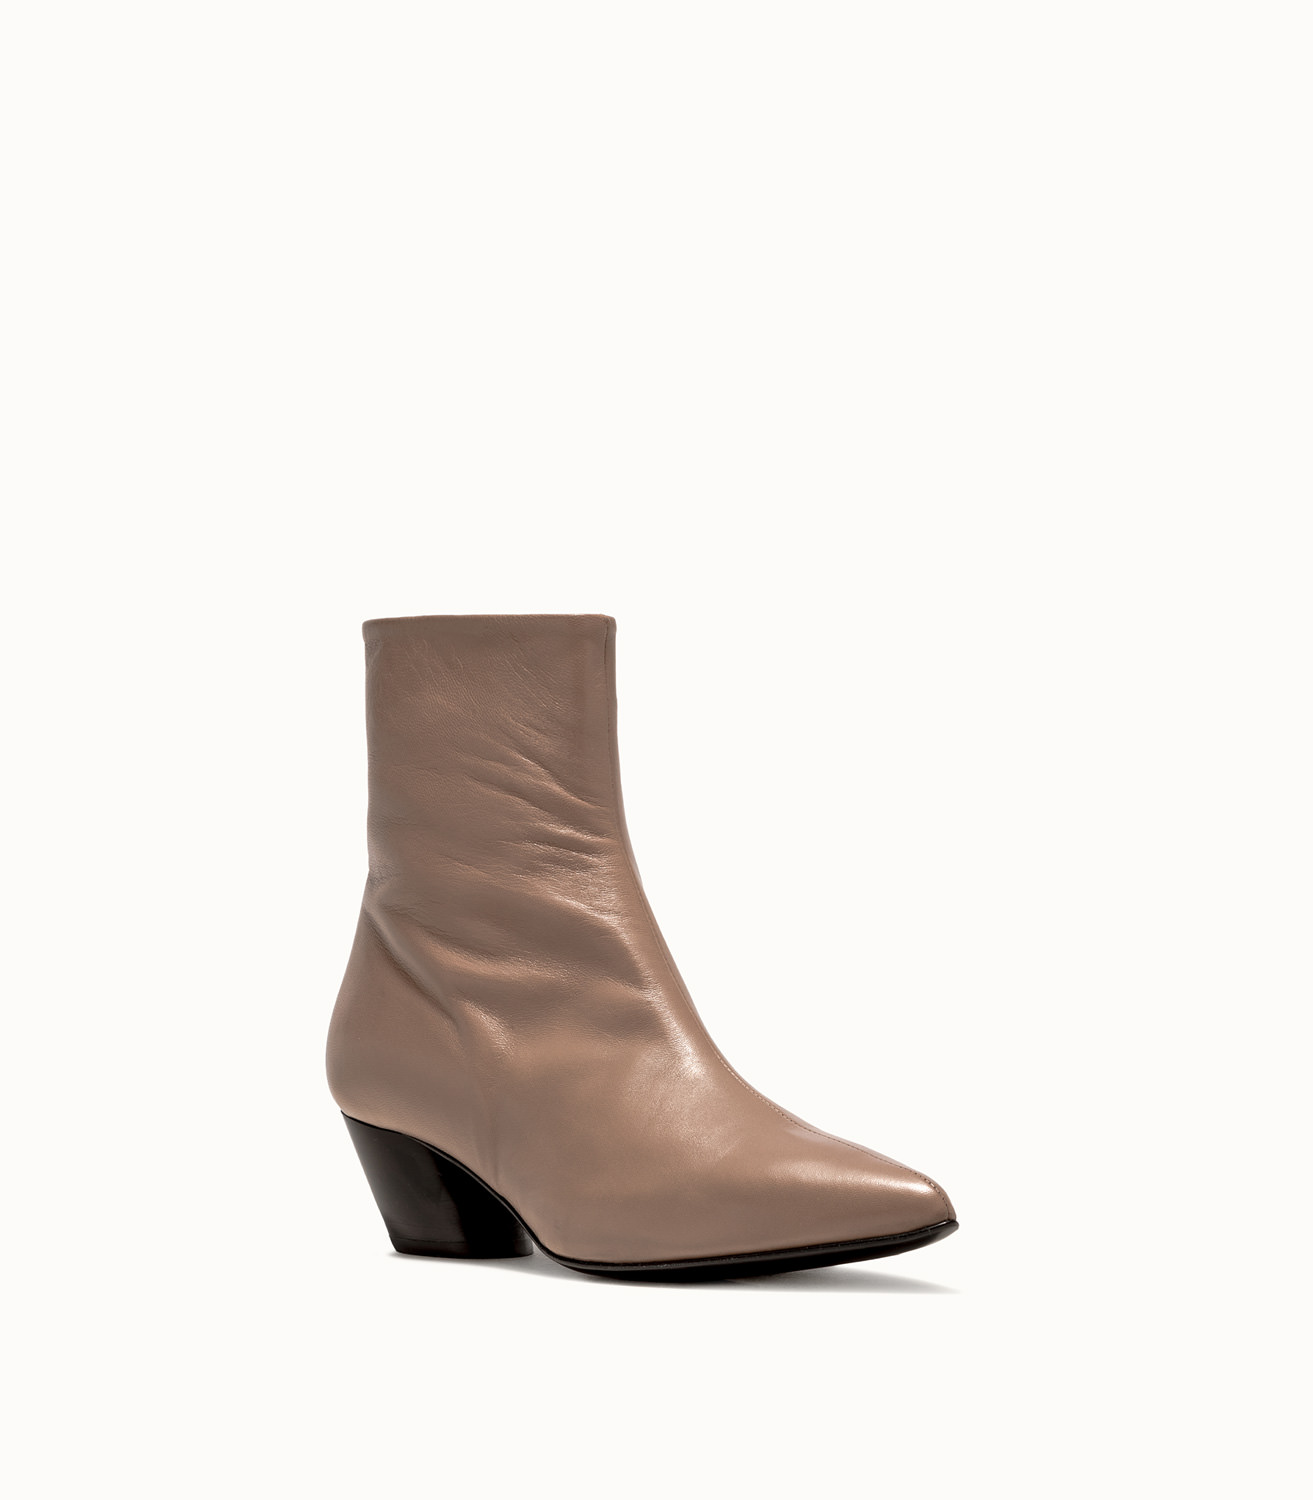 HALMANERA JUNY 89ANKLE BOOTS IN LEATHER | Playground